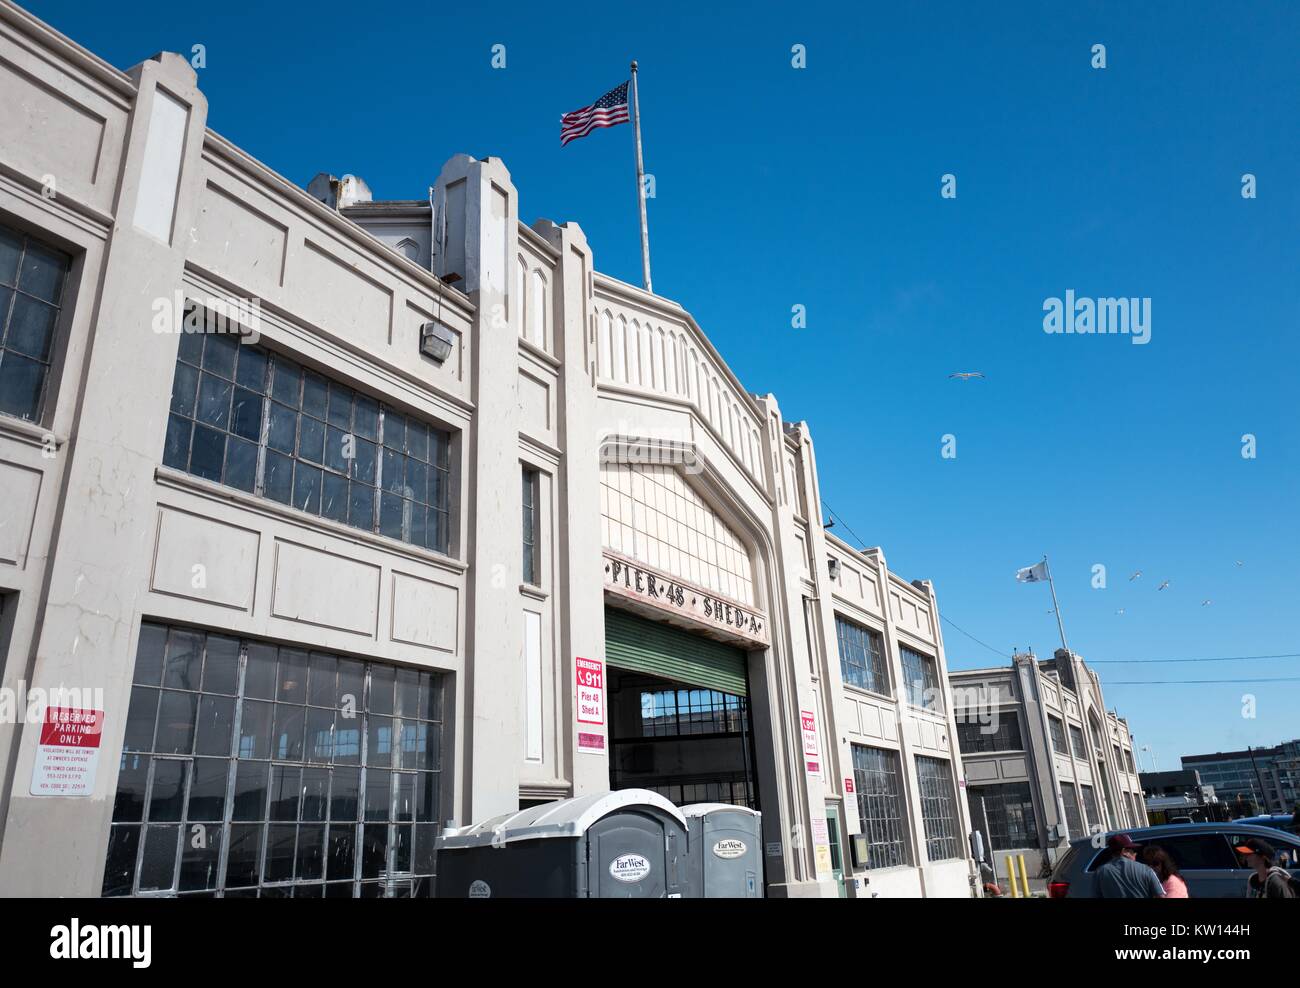 Pier 48, Shed A, a former storage shed at the Port of San Francisco, now used as a parking lot, on a sunny day, with an American Flag visible, San Francisco, California, 2016. Stock Photo